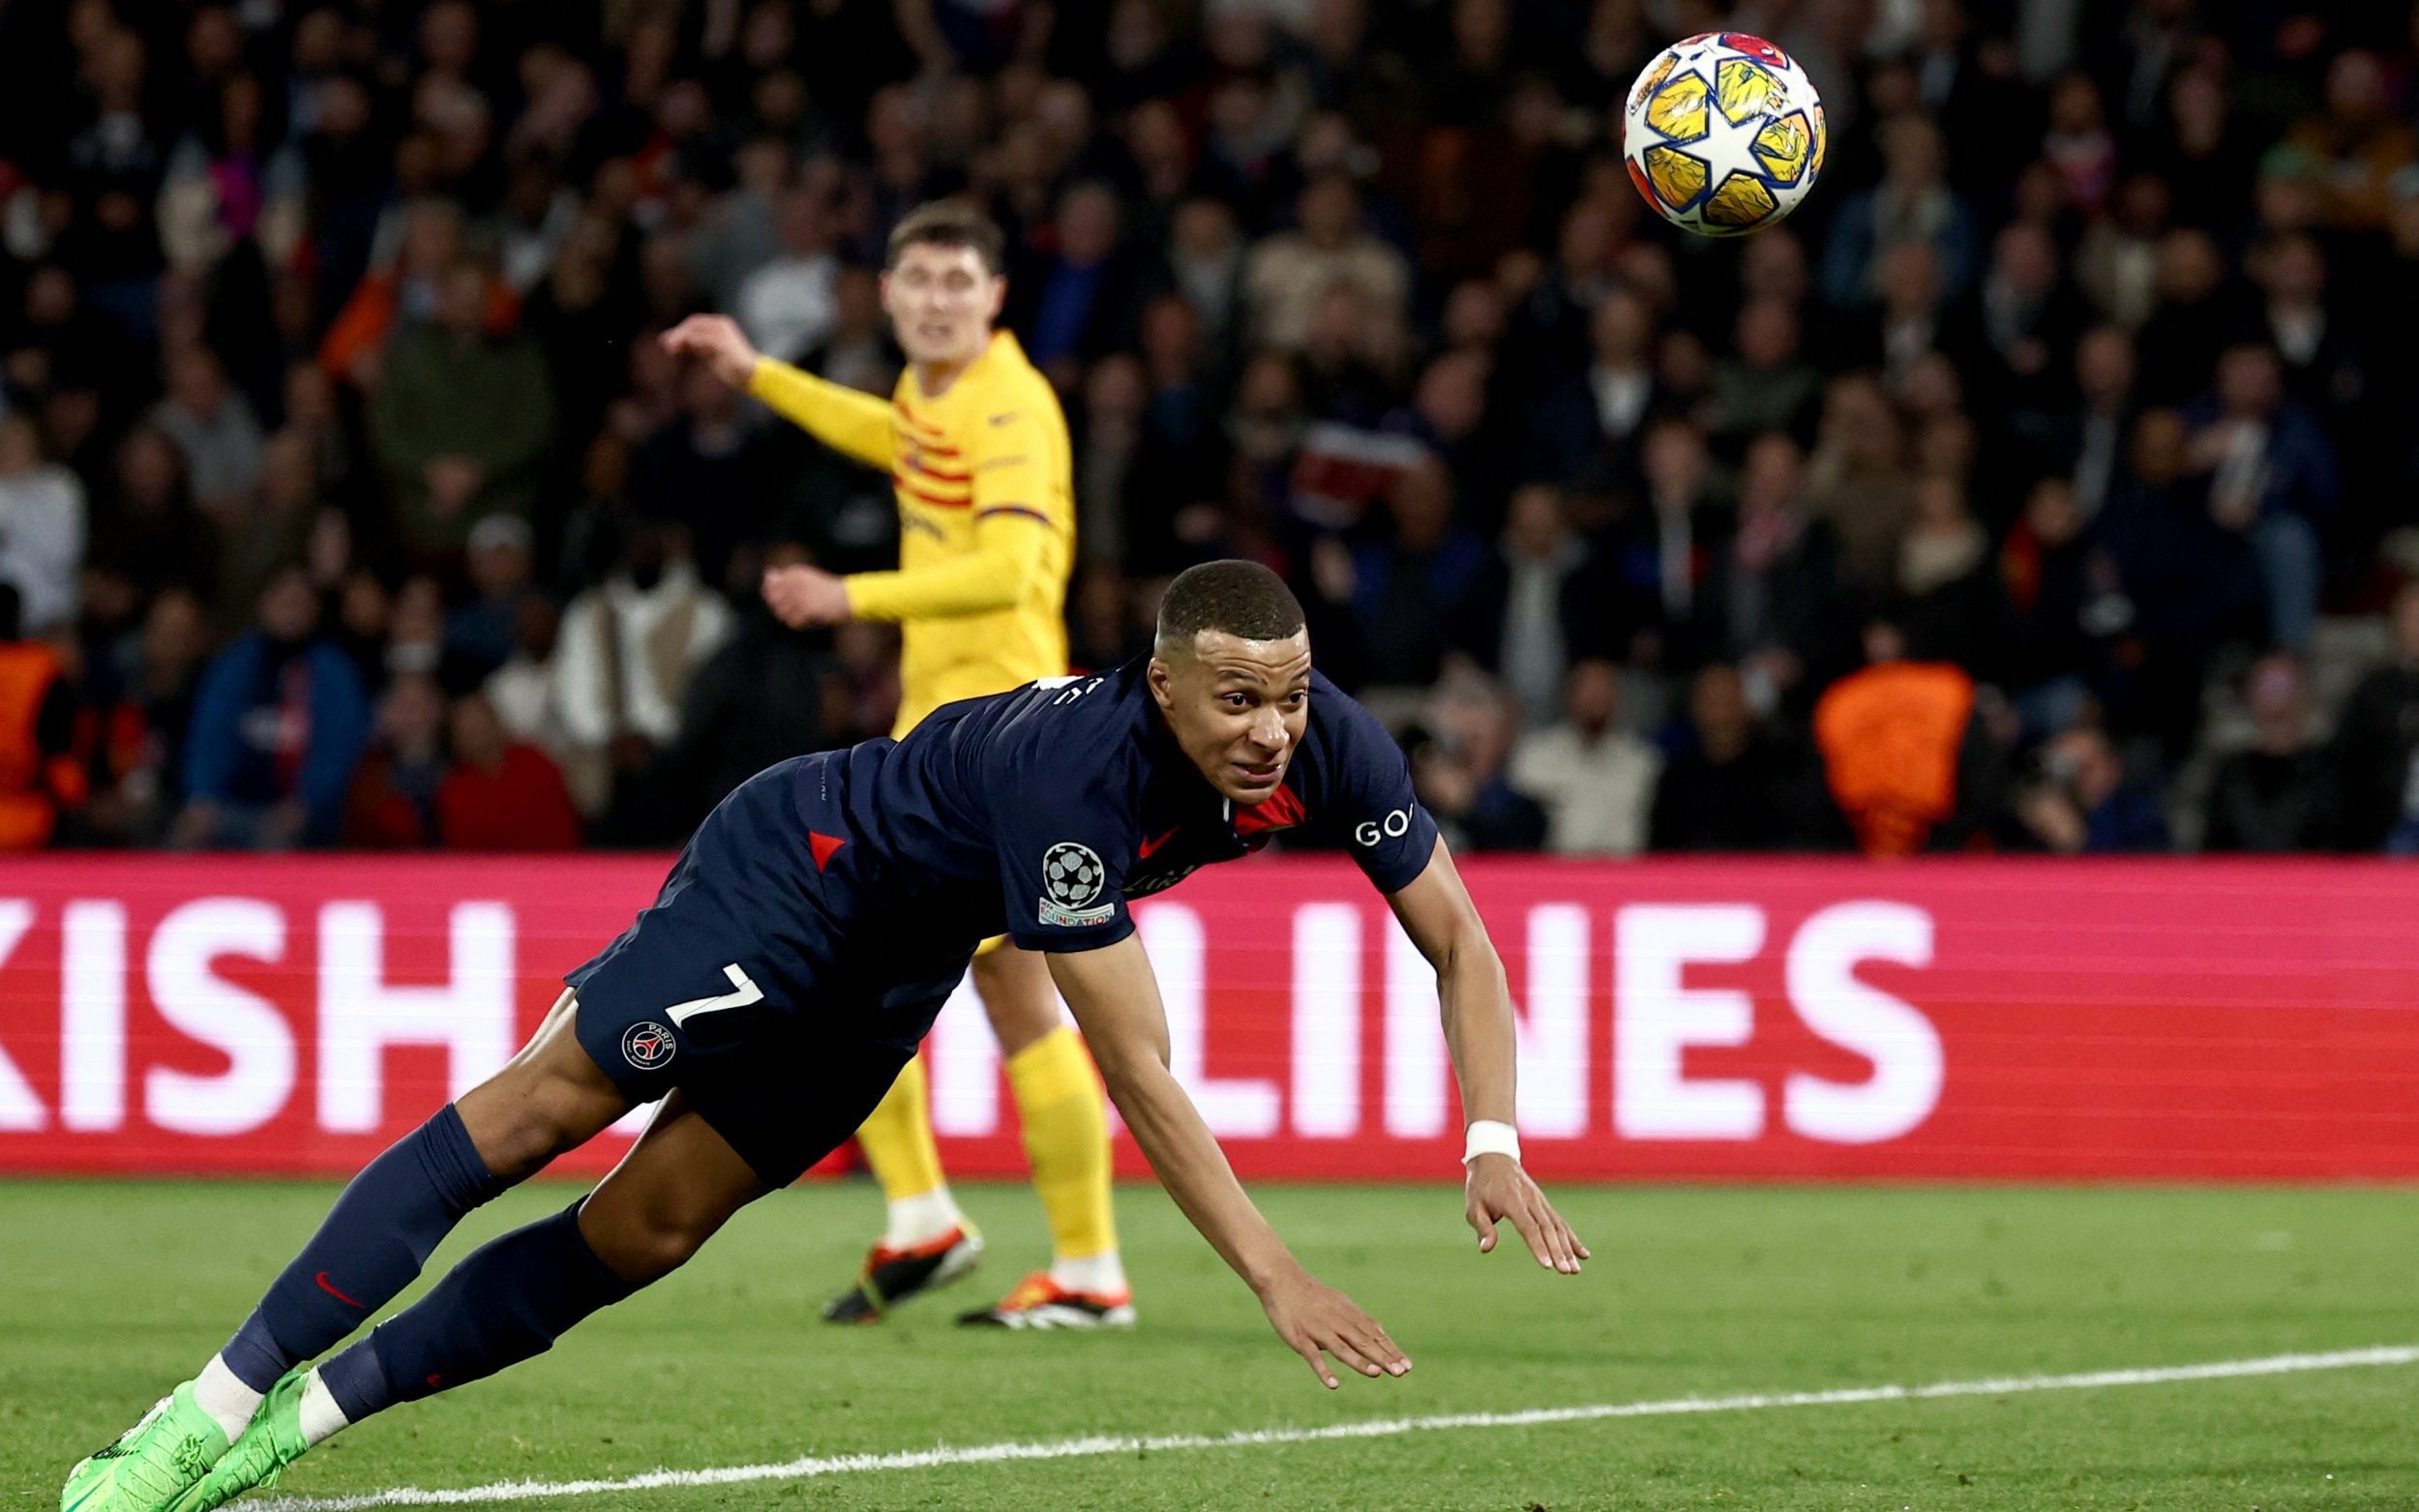 raphinha outshines kylian mbappe as barcelona earn advantage over psg in five-goal thriller